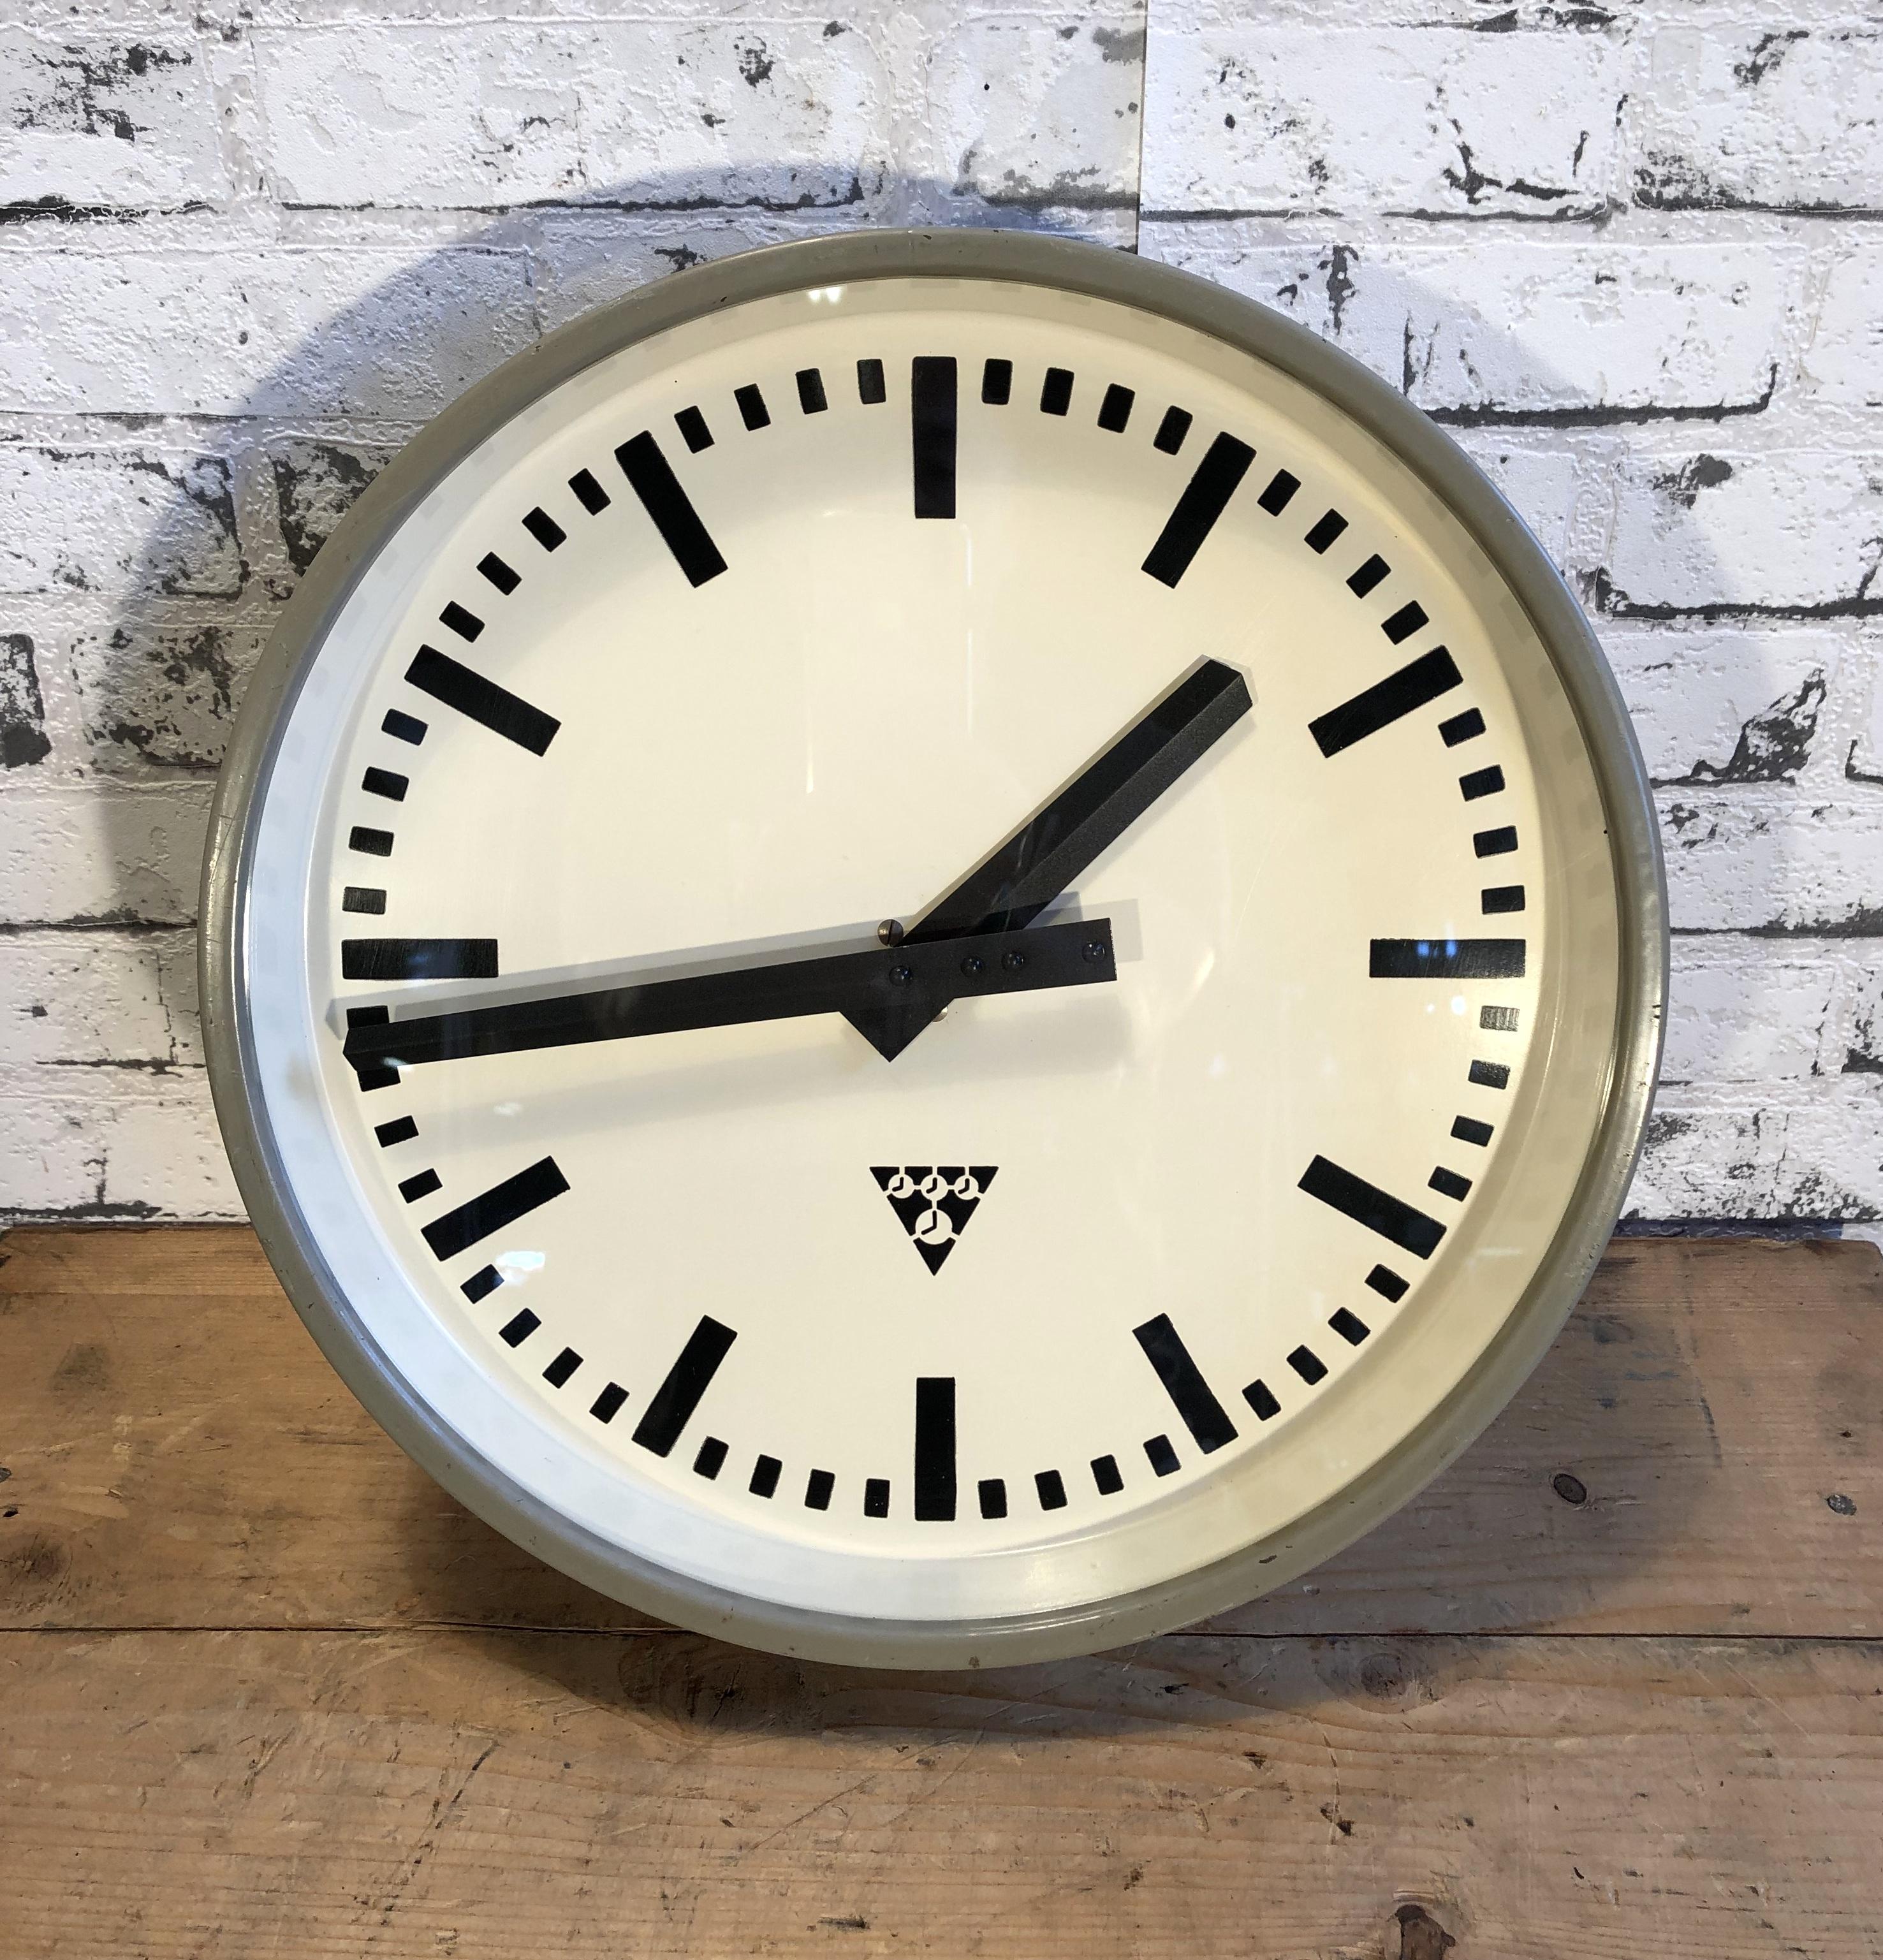 Pragotron wall clock made in former Czechoslovakia during the 1960s. It Features a grey metal frame, iron dial and clear glass cover. The piece has been converted into a battery-powered clockwork and requires only one AA-battery. Measure: Diameter